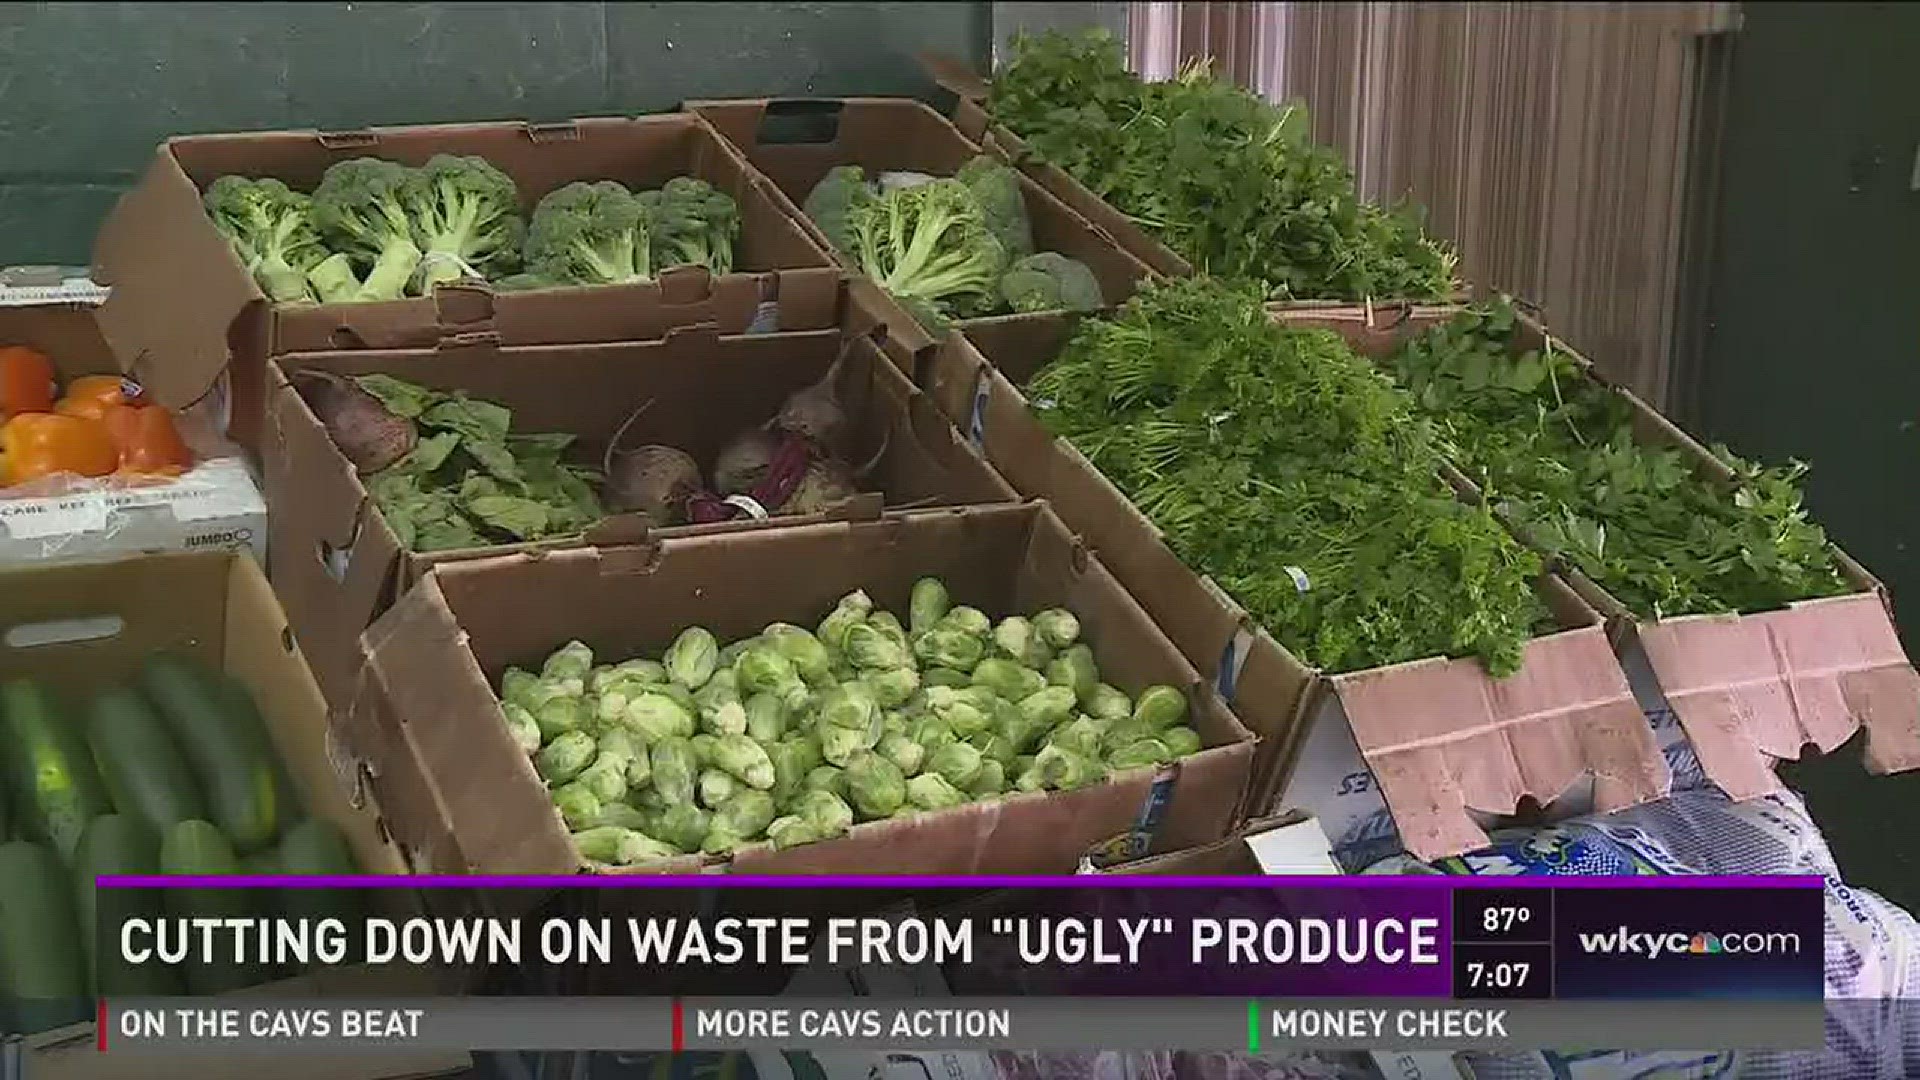 Cutting down on waste from "ugly" produce